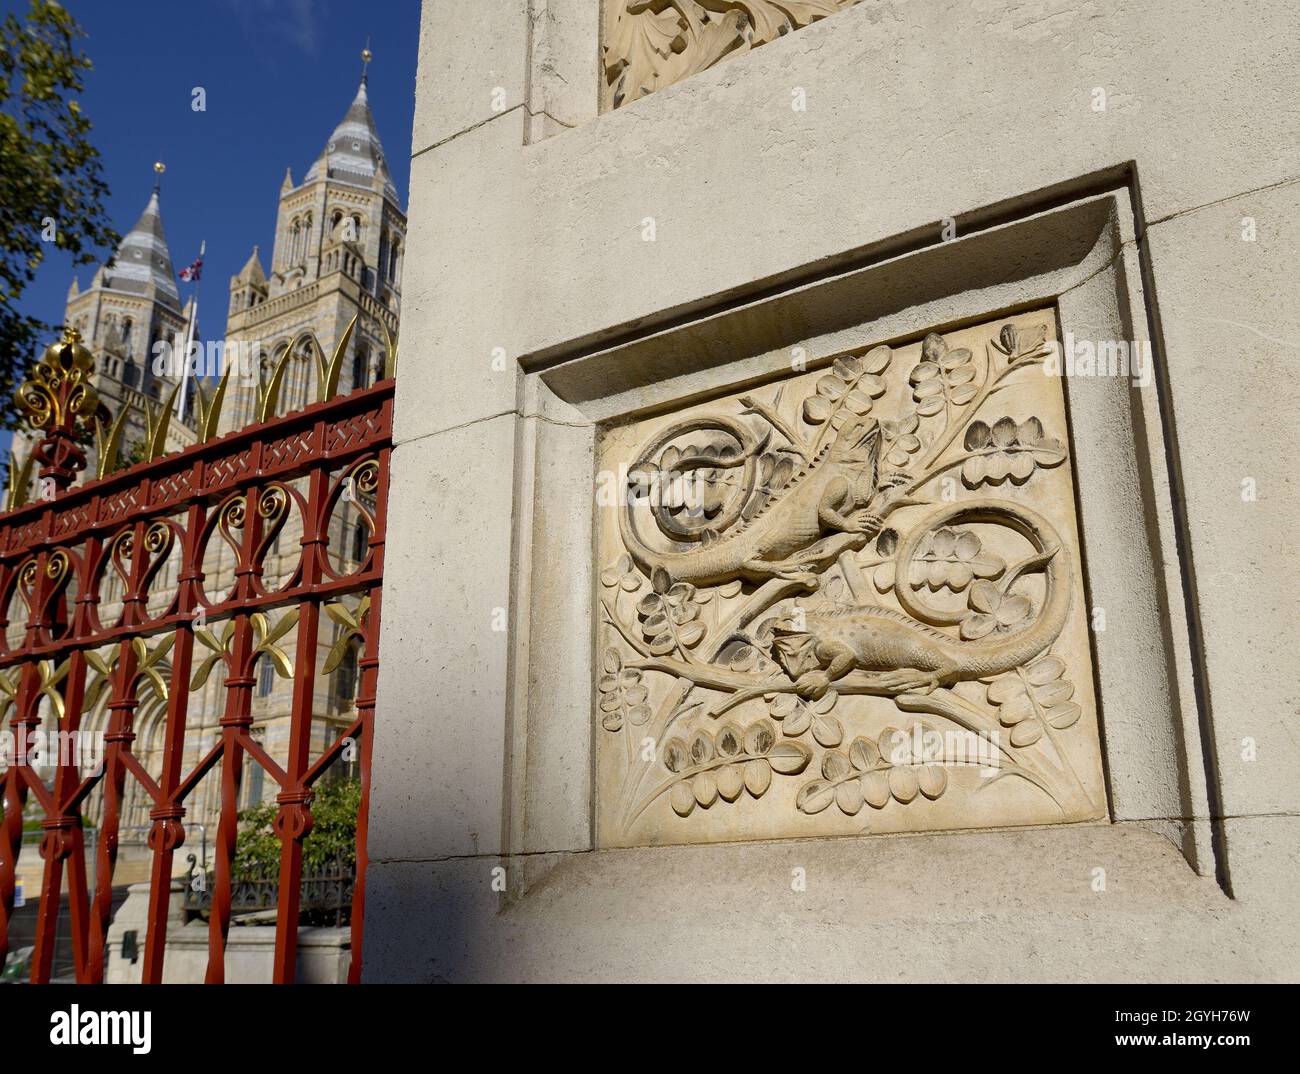 London, England, UK. Natural History Museum, Kensington. Carved relief stone panel on the Cromwell Road wall depicting animals: Iguanas Stock Photo